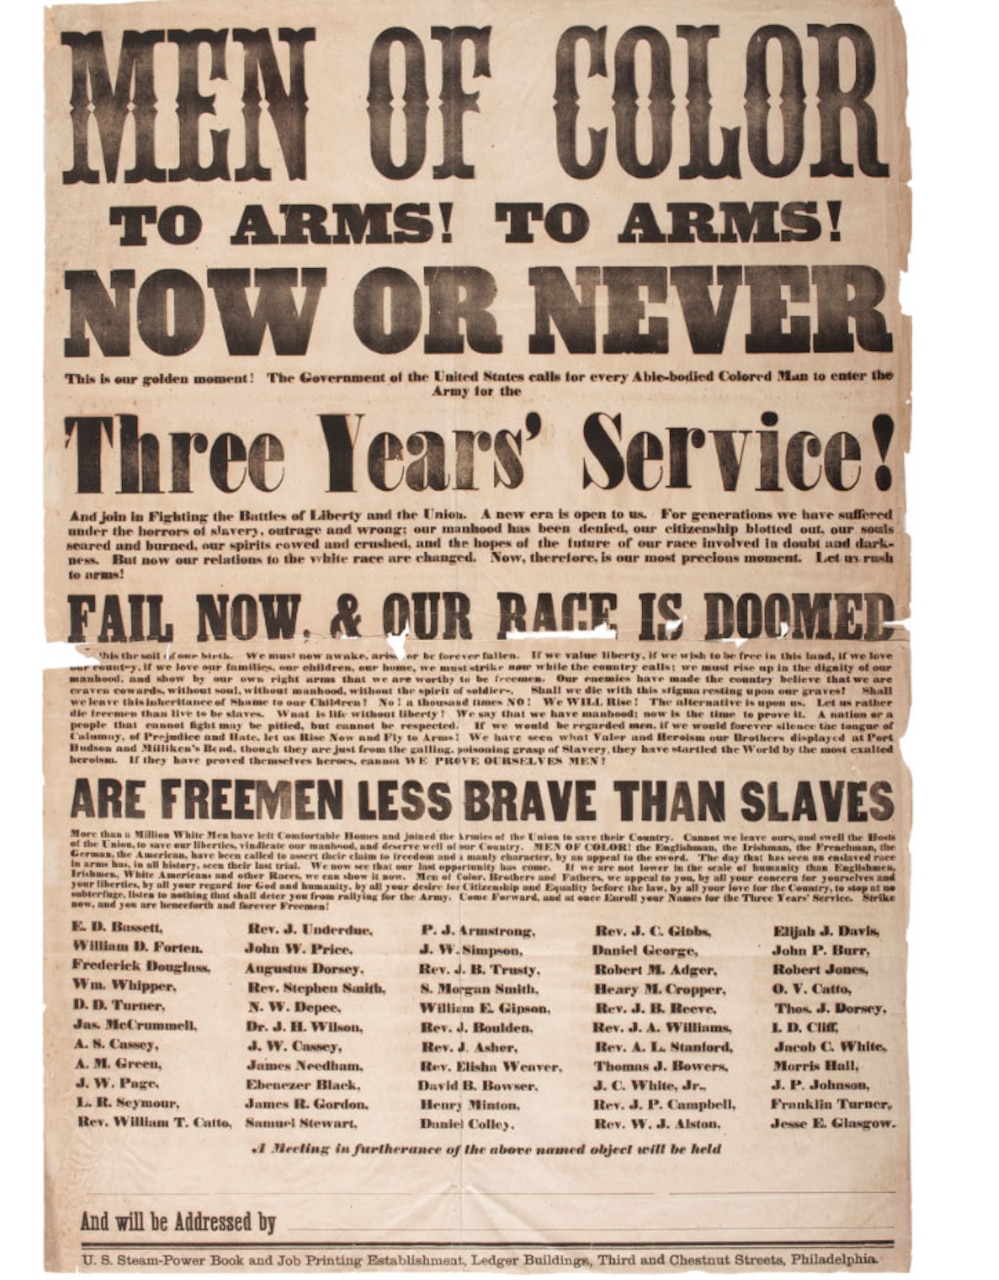 A flyer from the 1860s urges "men of color" to enlist in the Union Army.